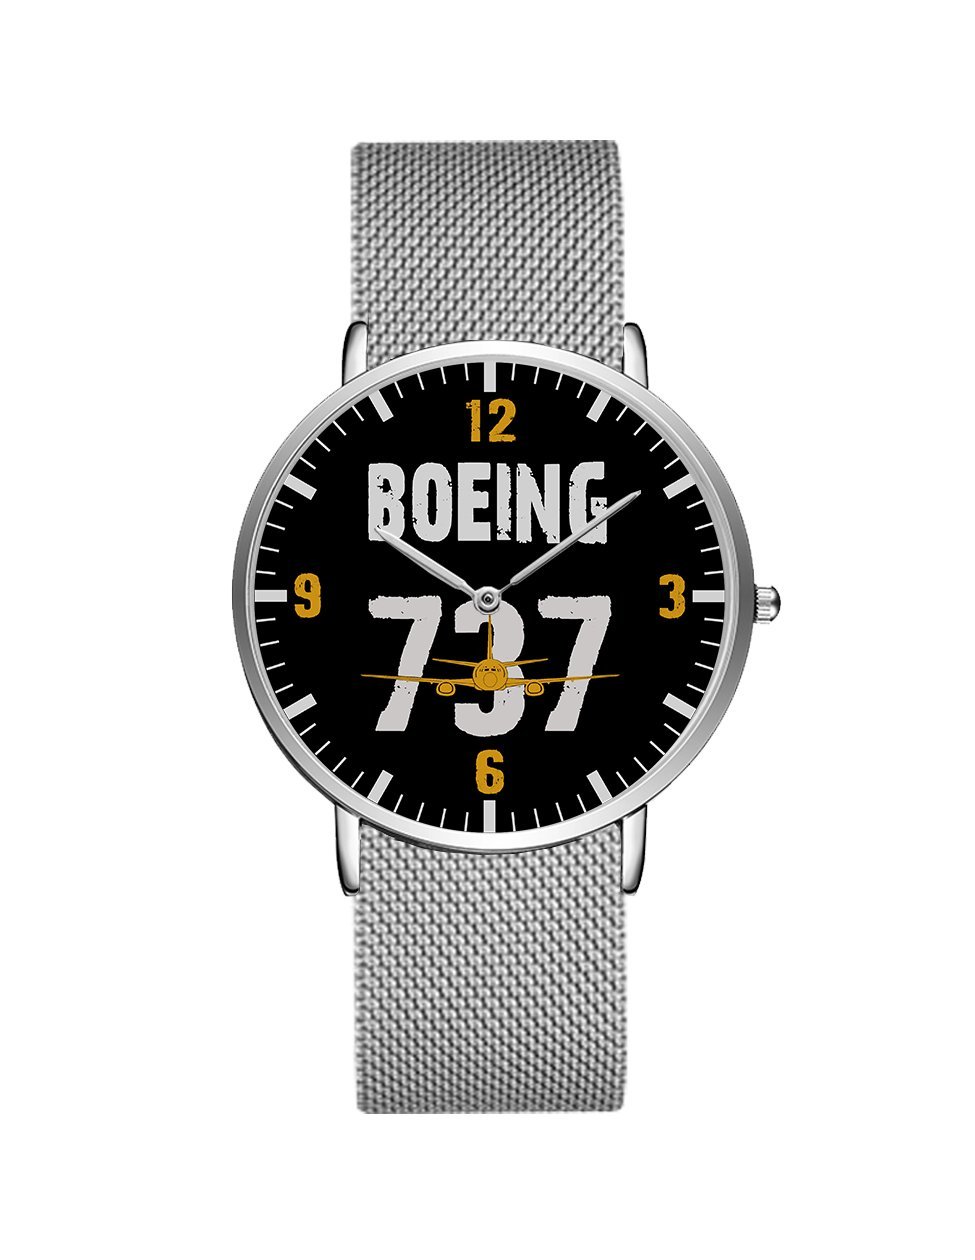 Boeing 737 Designed Stainless Steel Strap Watches Pilot Eyes Store Silver & Silver Stainless Steel Strap 